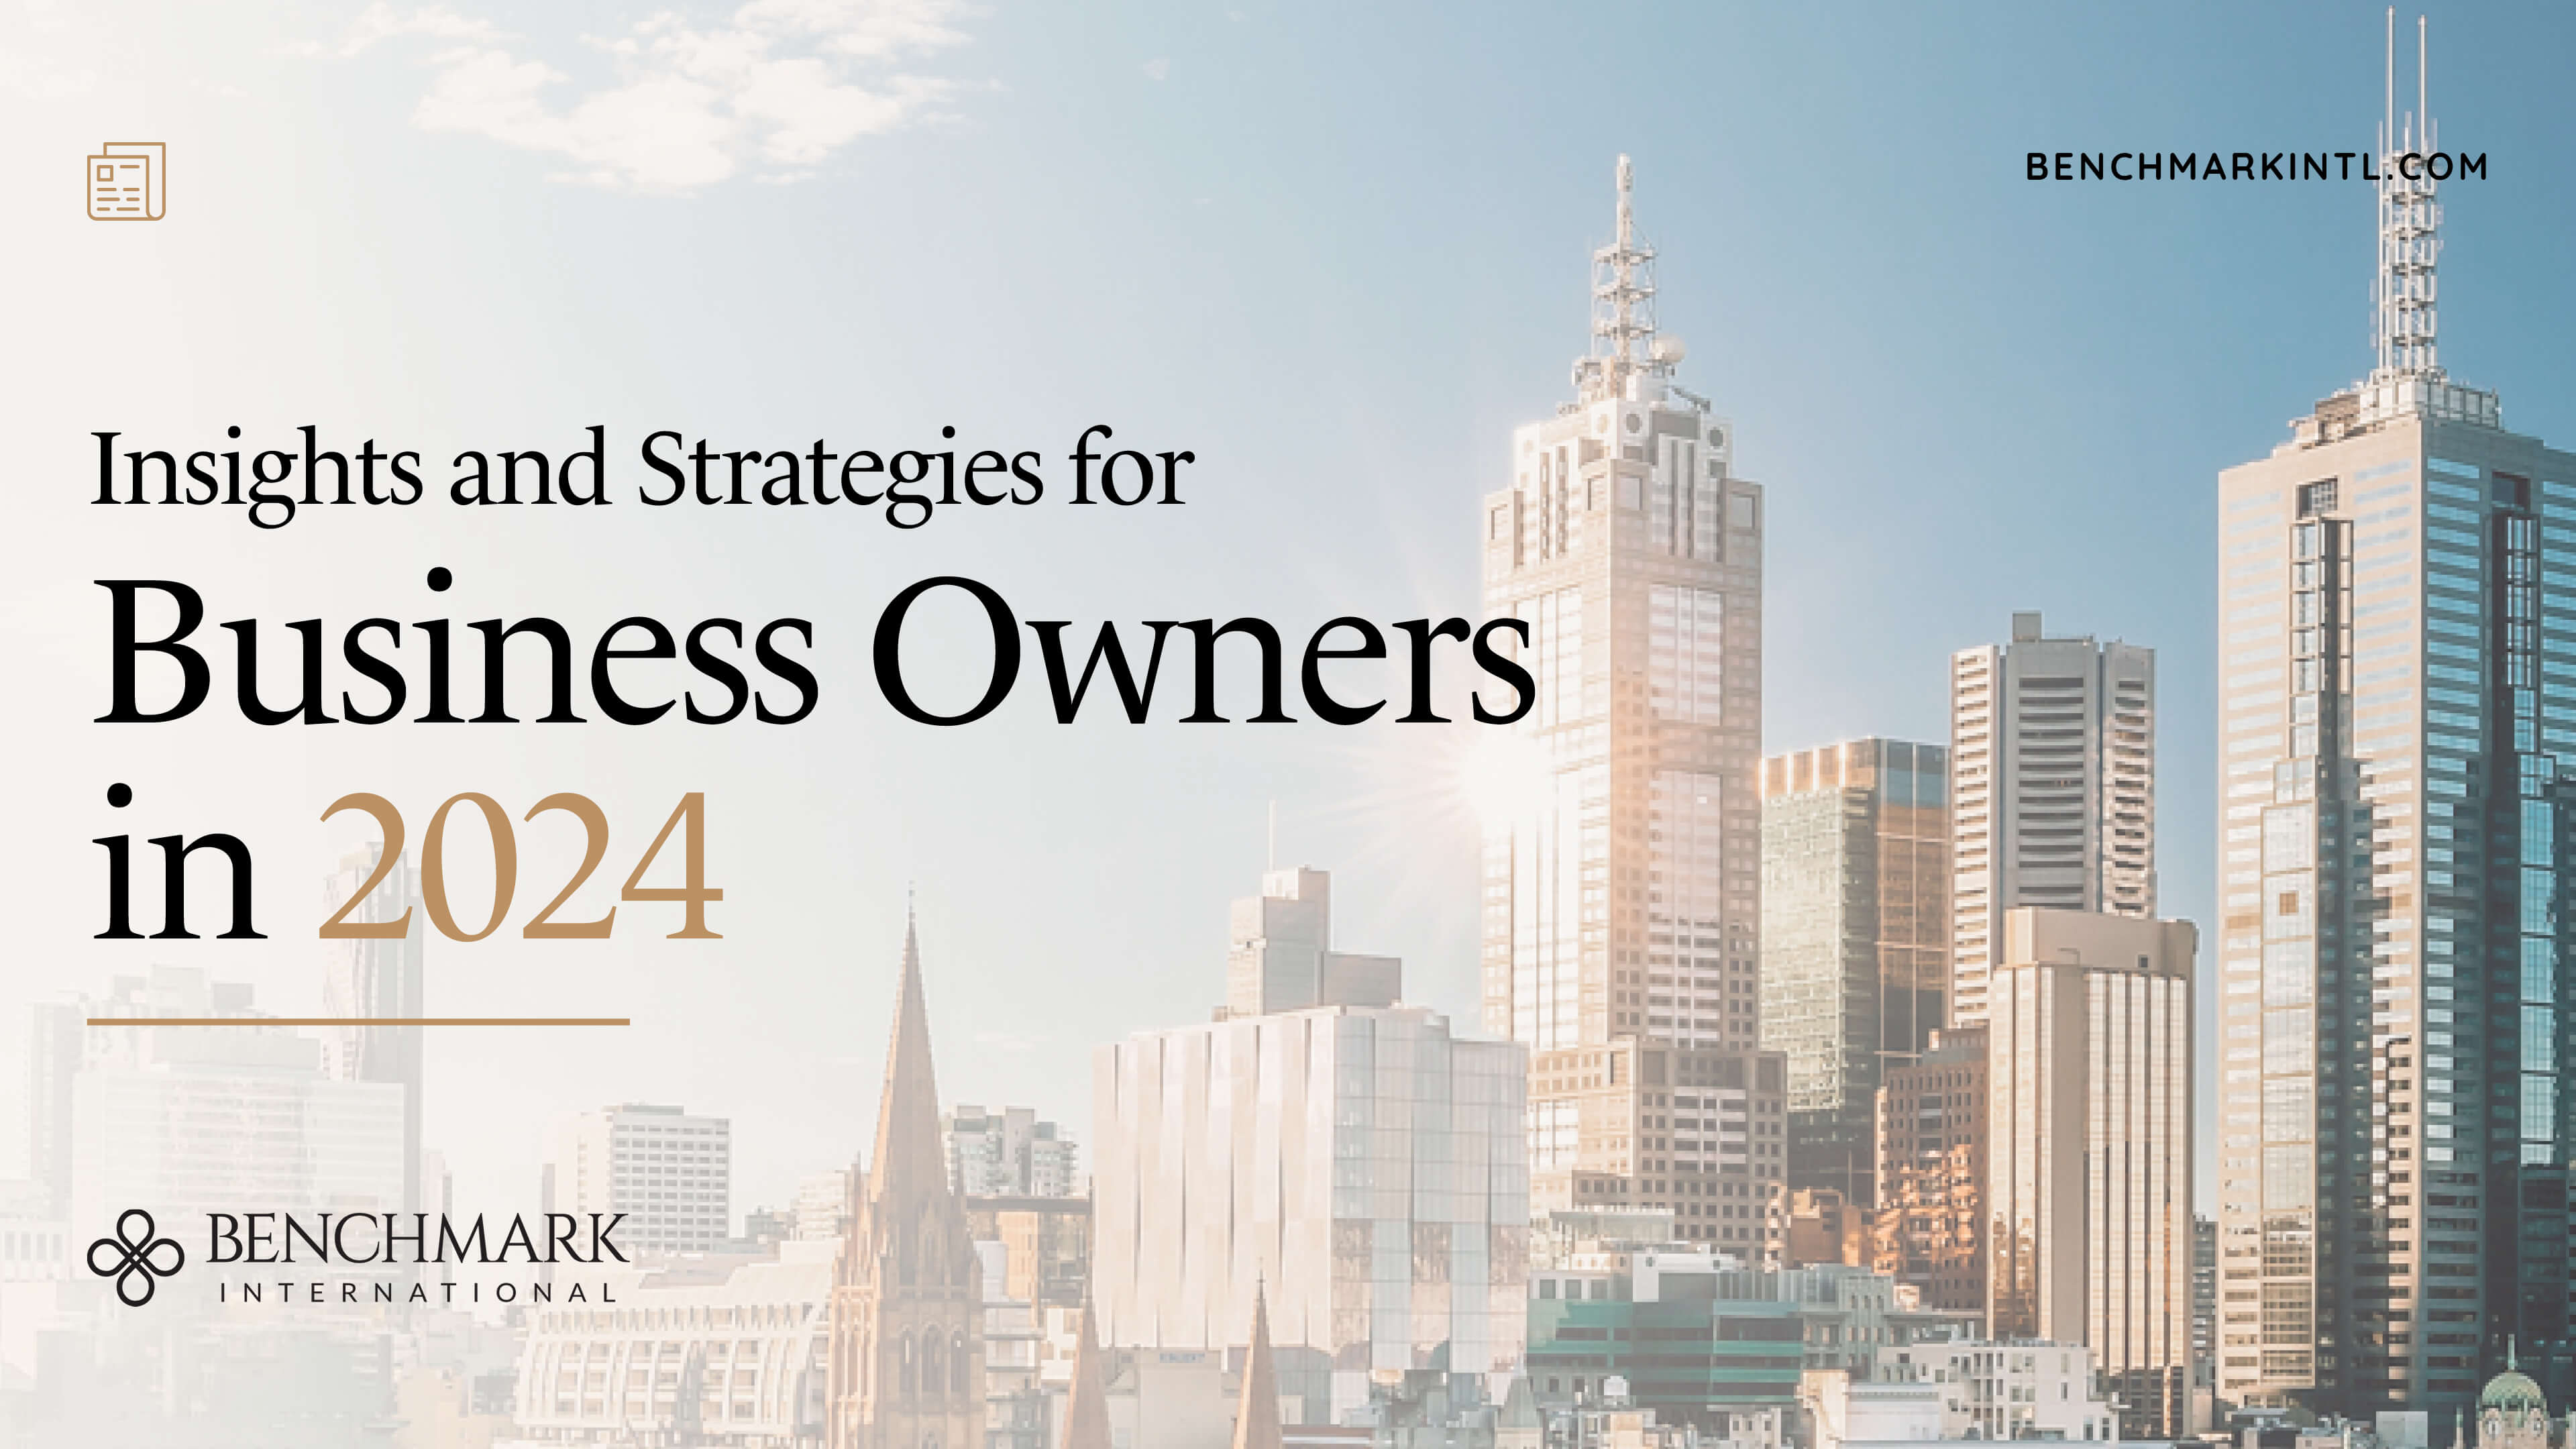 Retirement Planning: Insights and Strategies for Business Owners in 2024